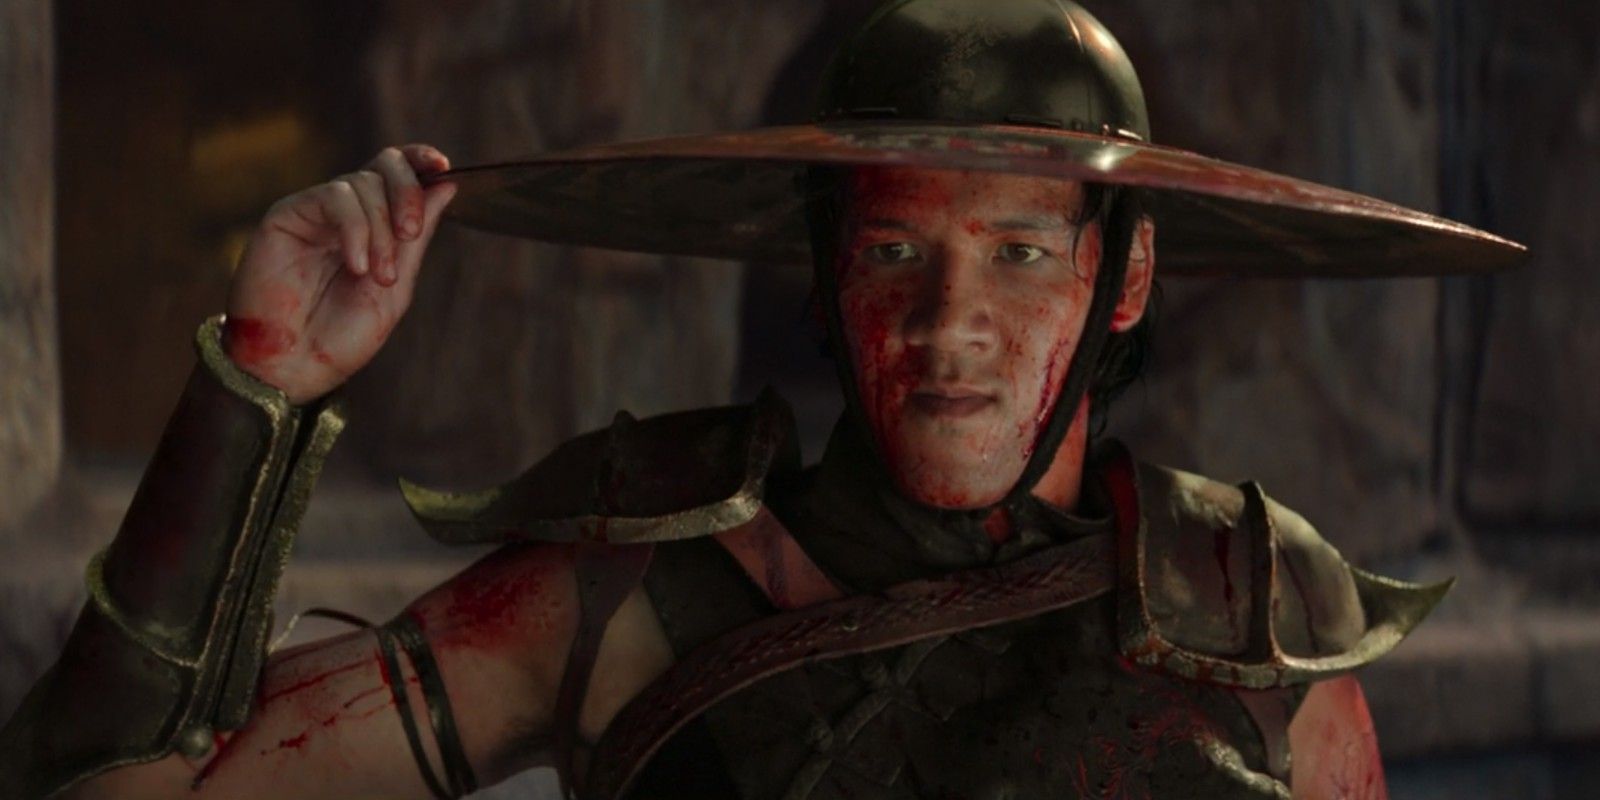 Kung Lao after a flawless victory in the new Mortal Kombat film